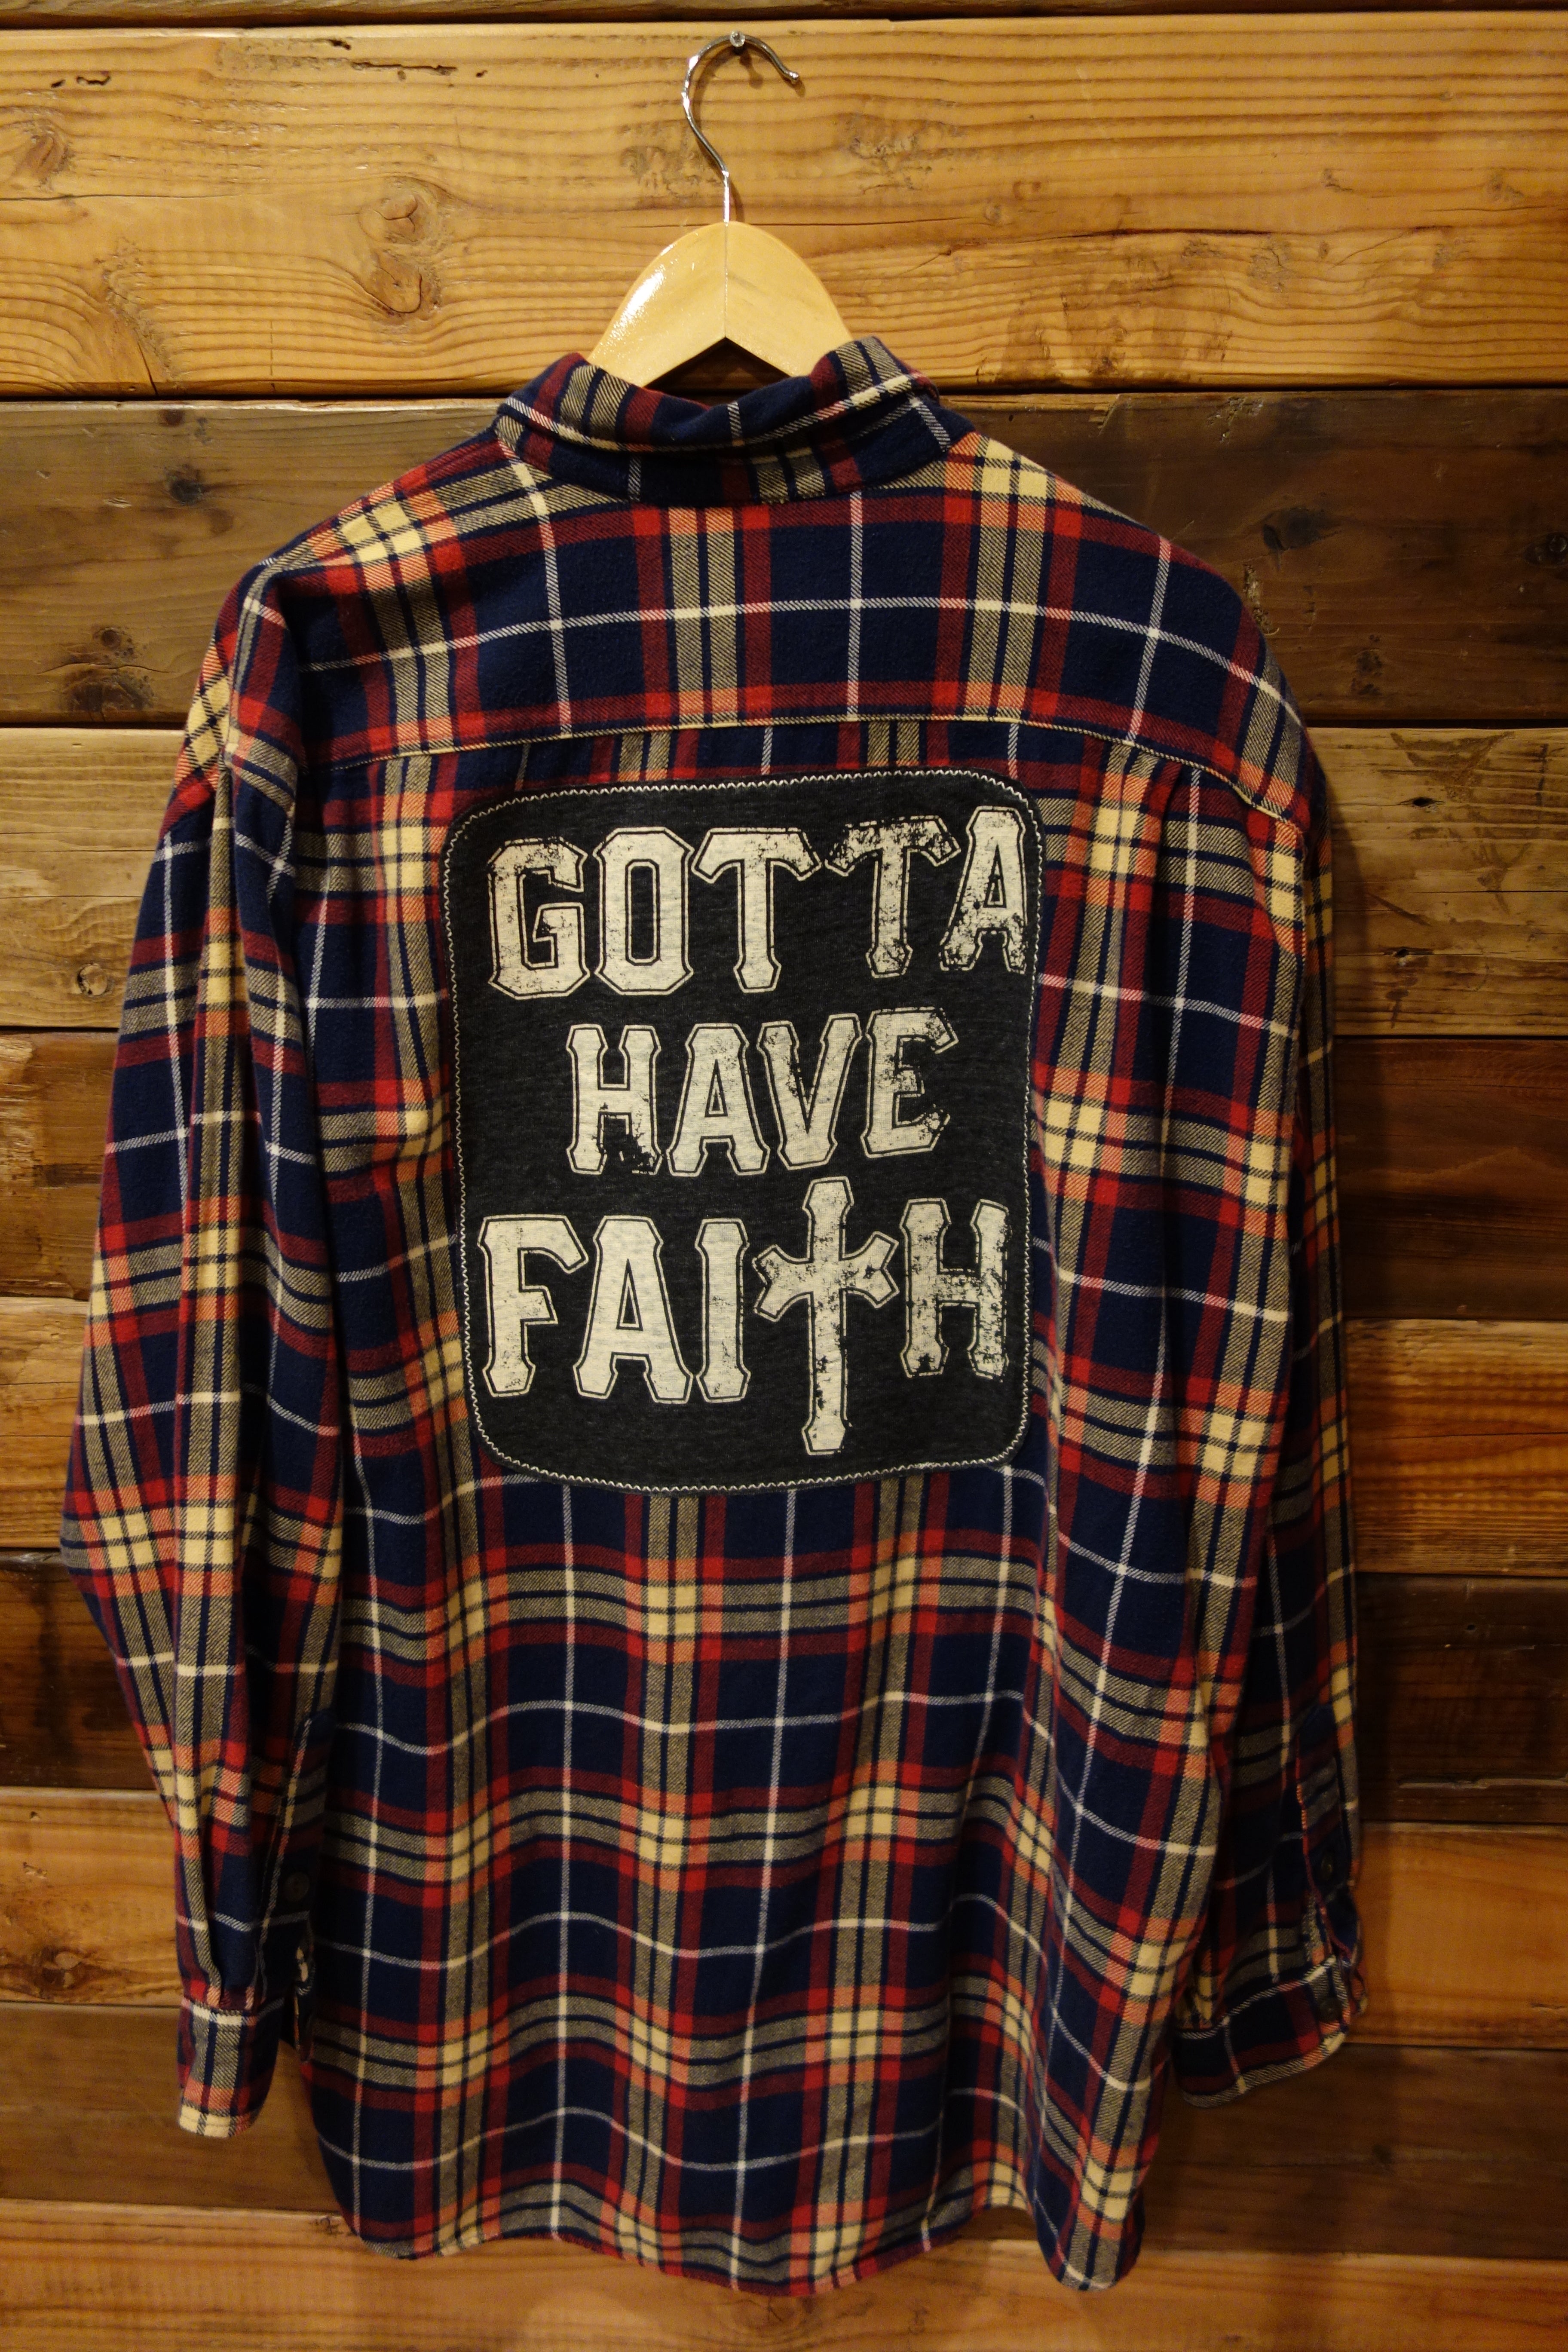 George Michael Gotta Have Faith one of a kind vintage Abercrombie and Fitch big shirt flannel 